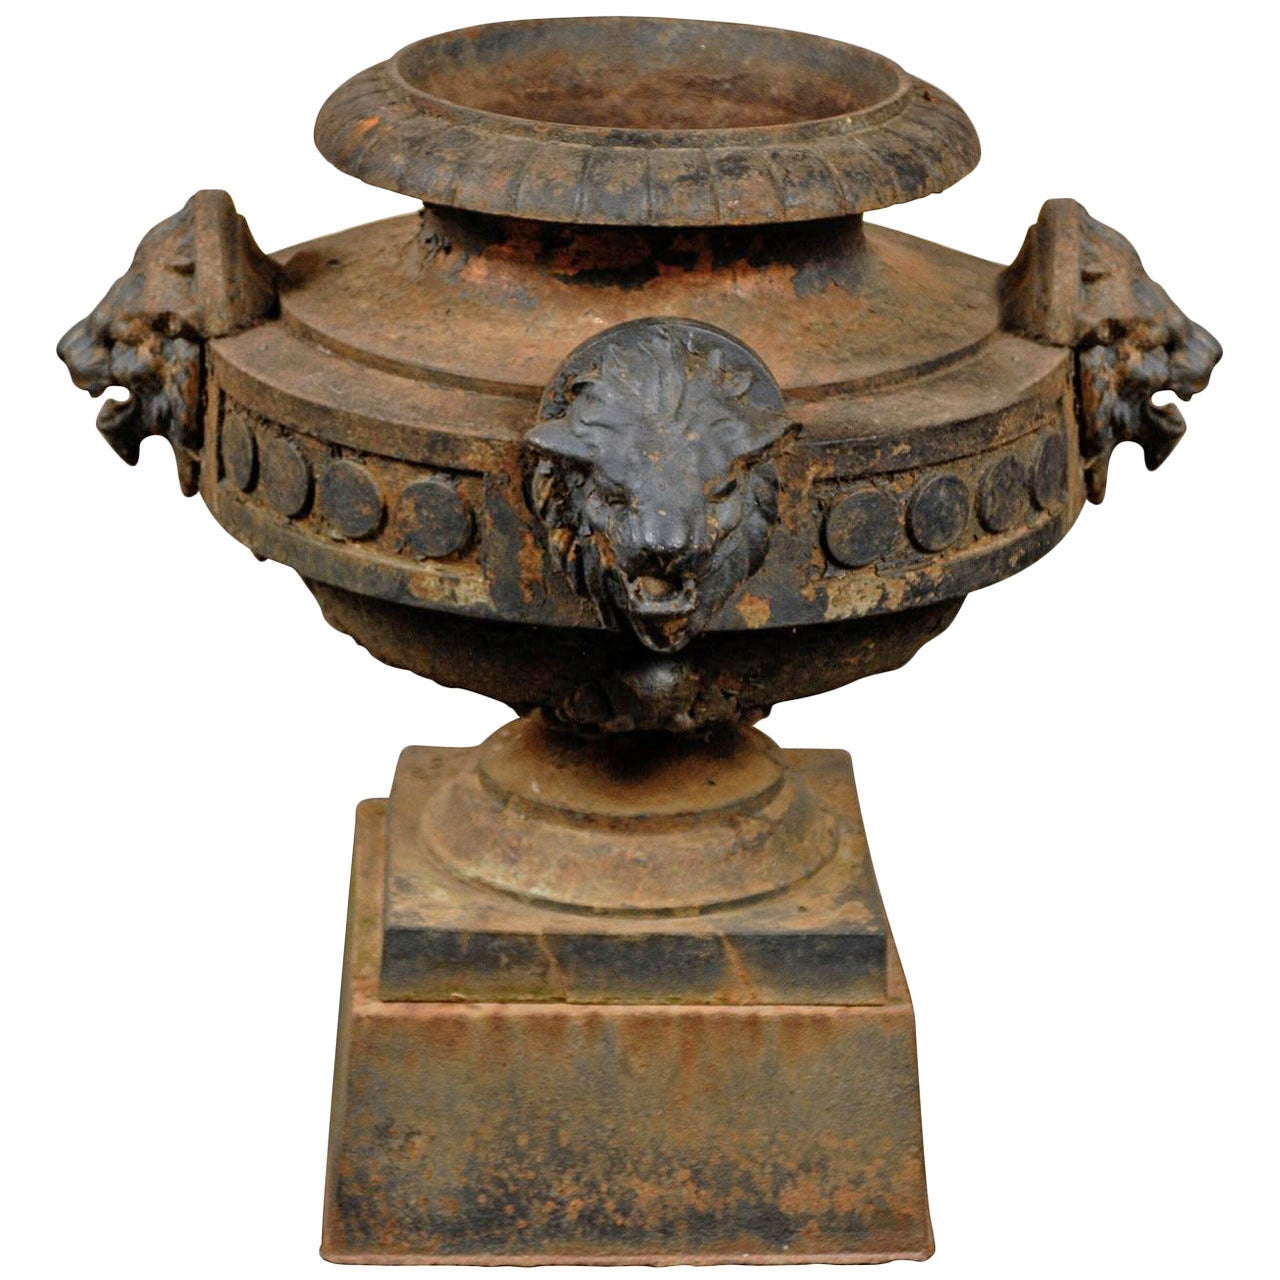 19th Century Iron Garden Urn with Lions Heads on Plinth